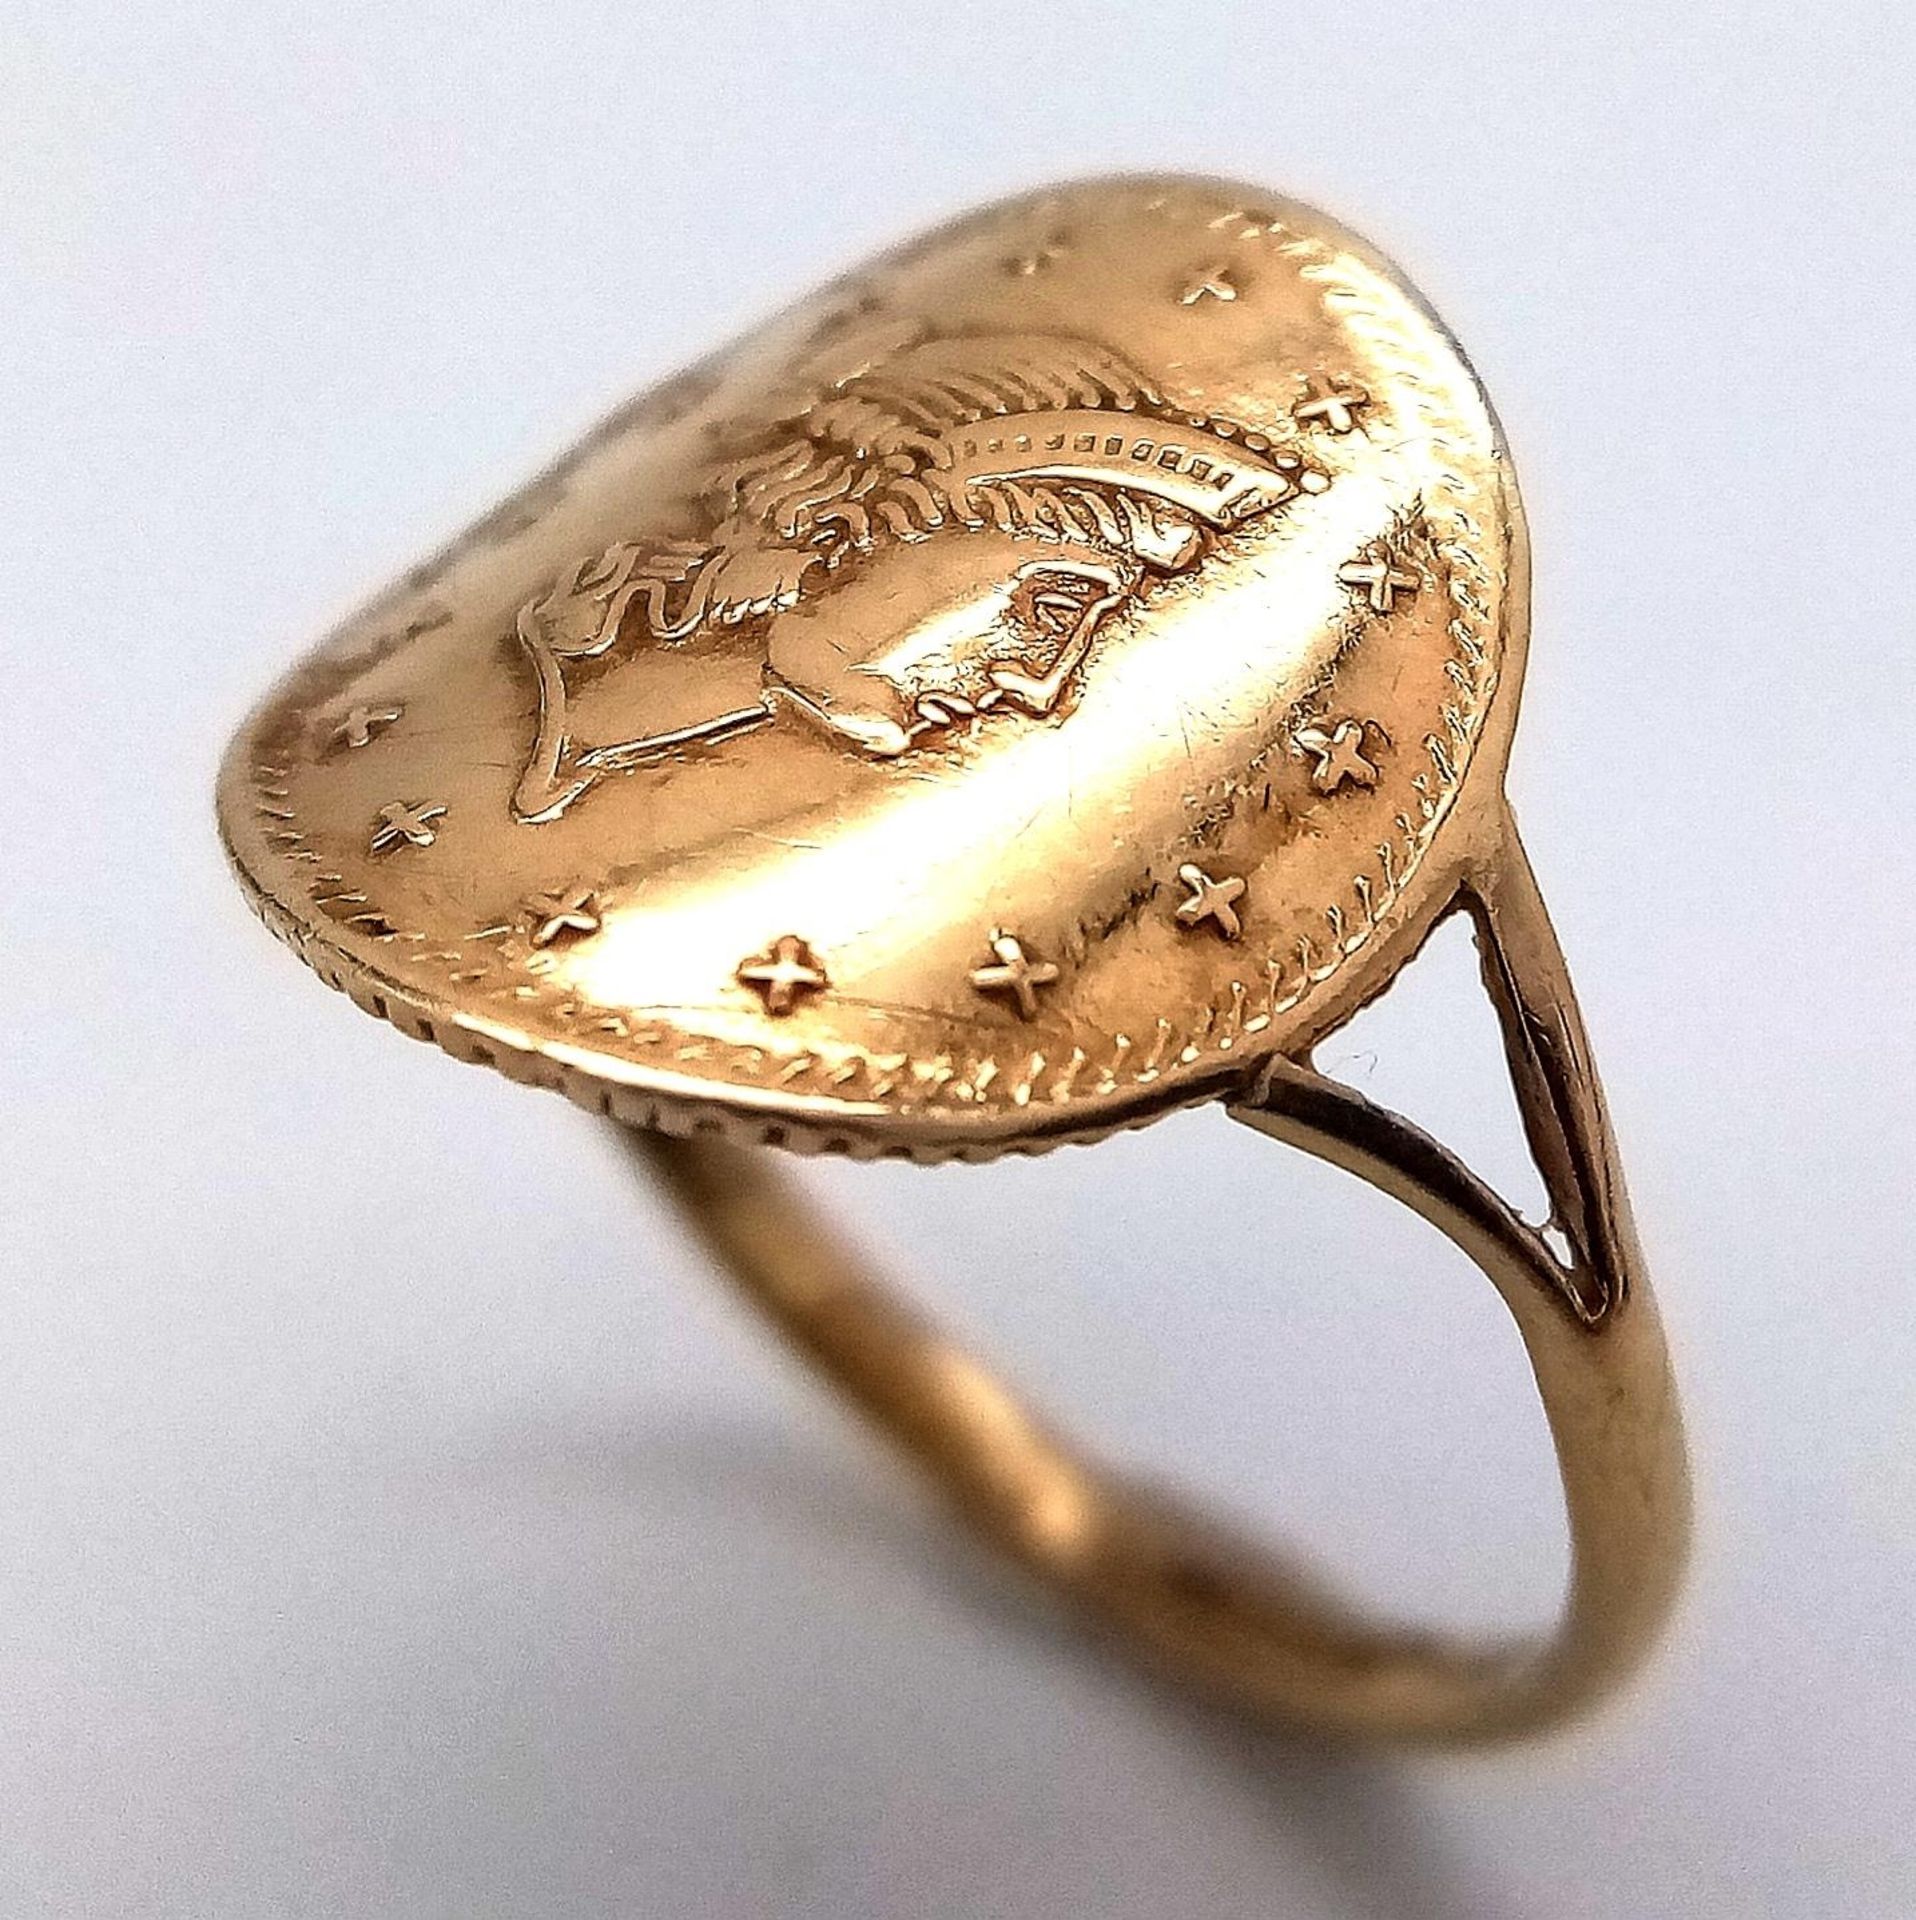 9K YELLOW GOLD COIN RING, WEIGHT 1.2G SIZE K - Image 2 of 5